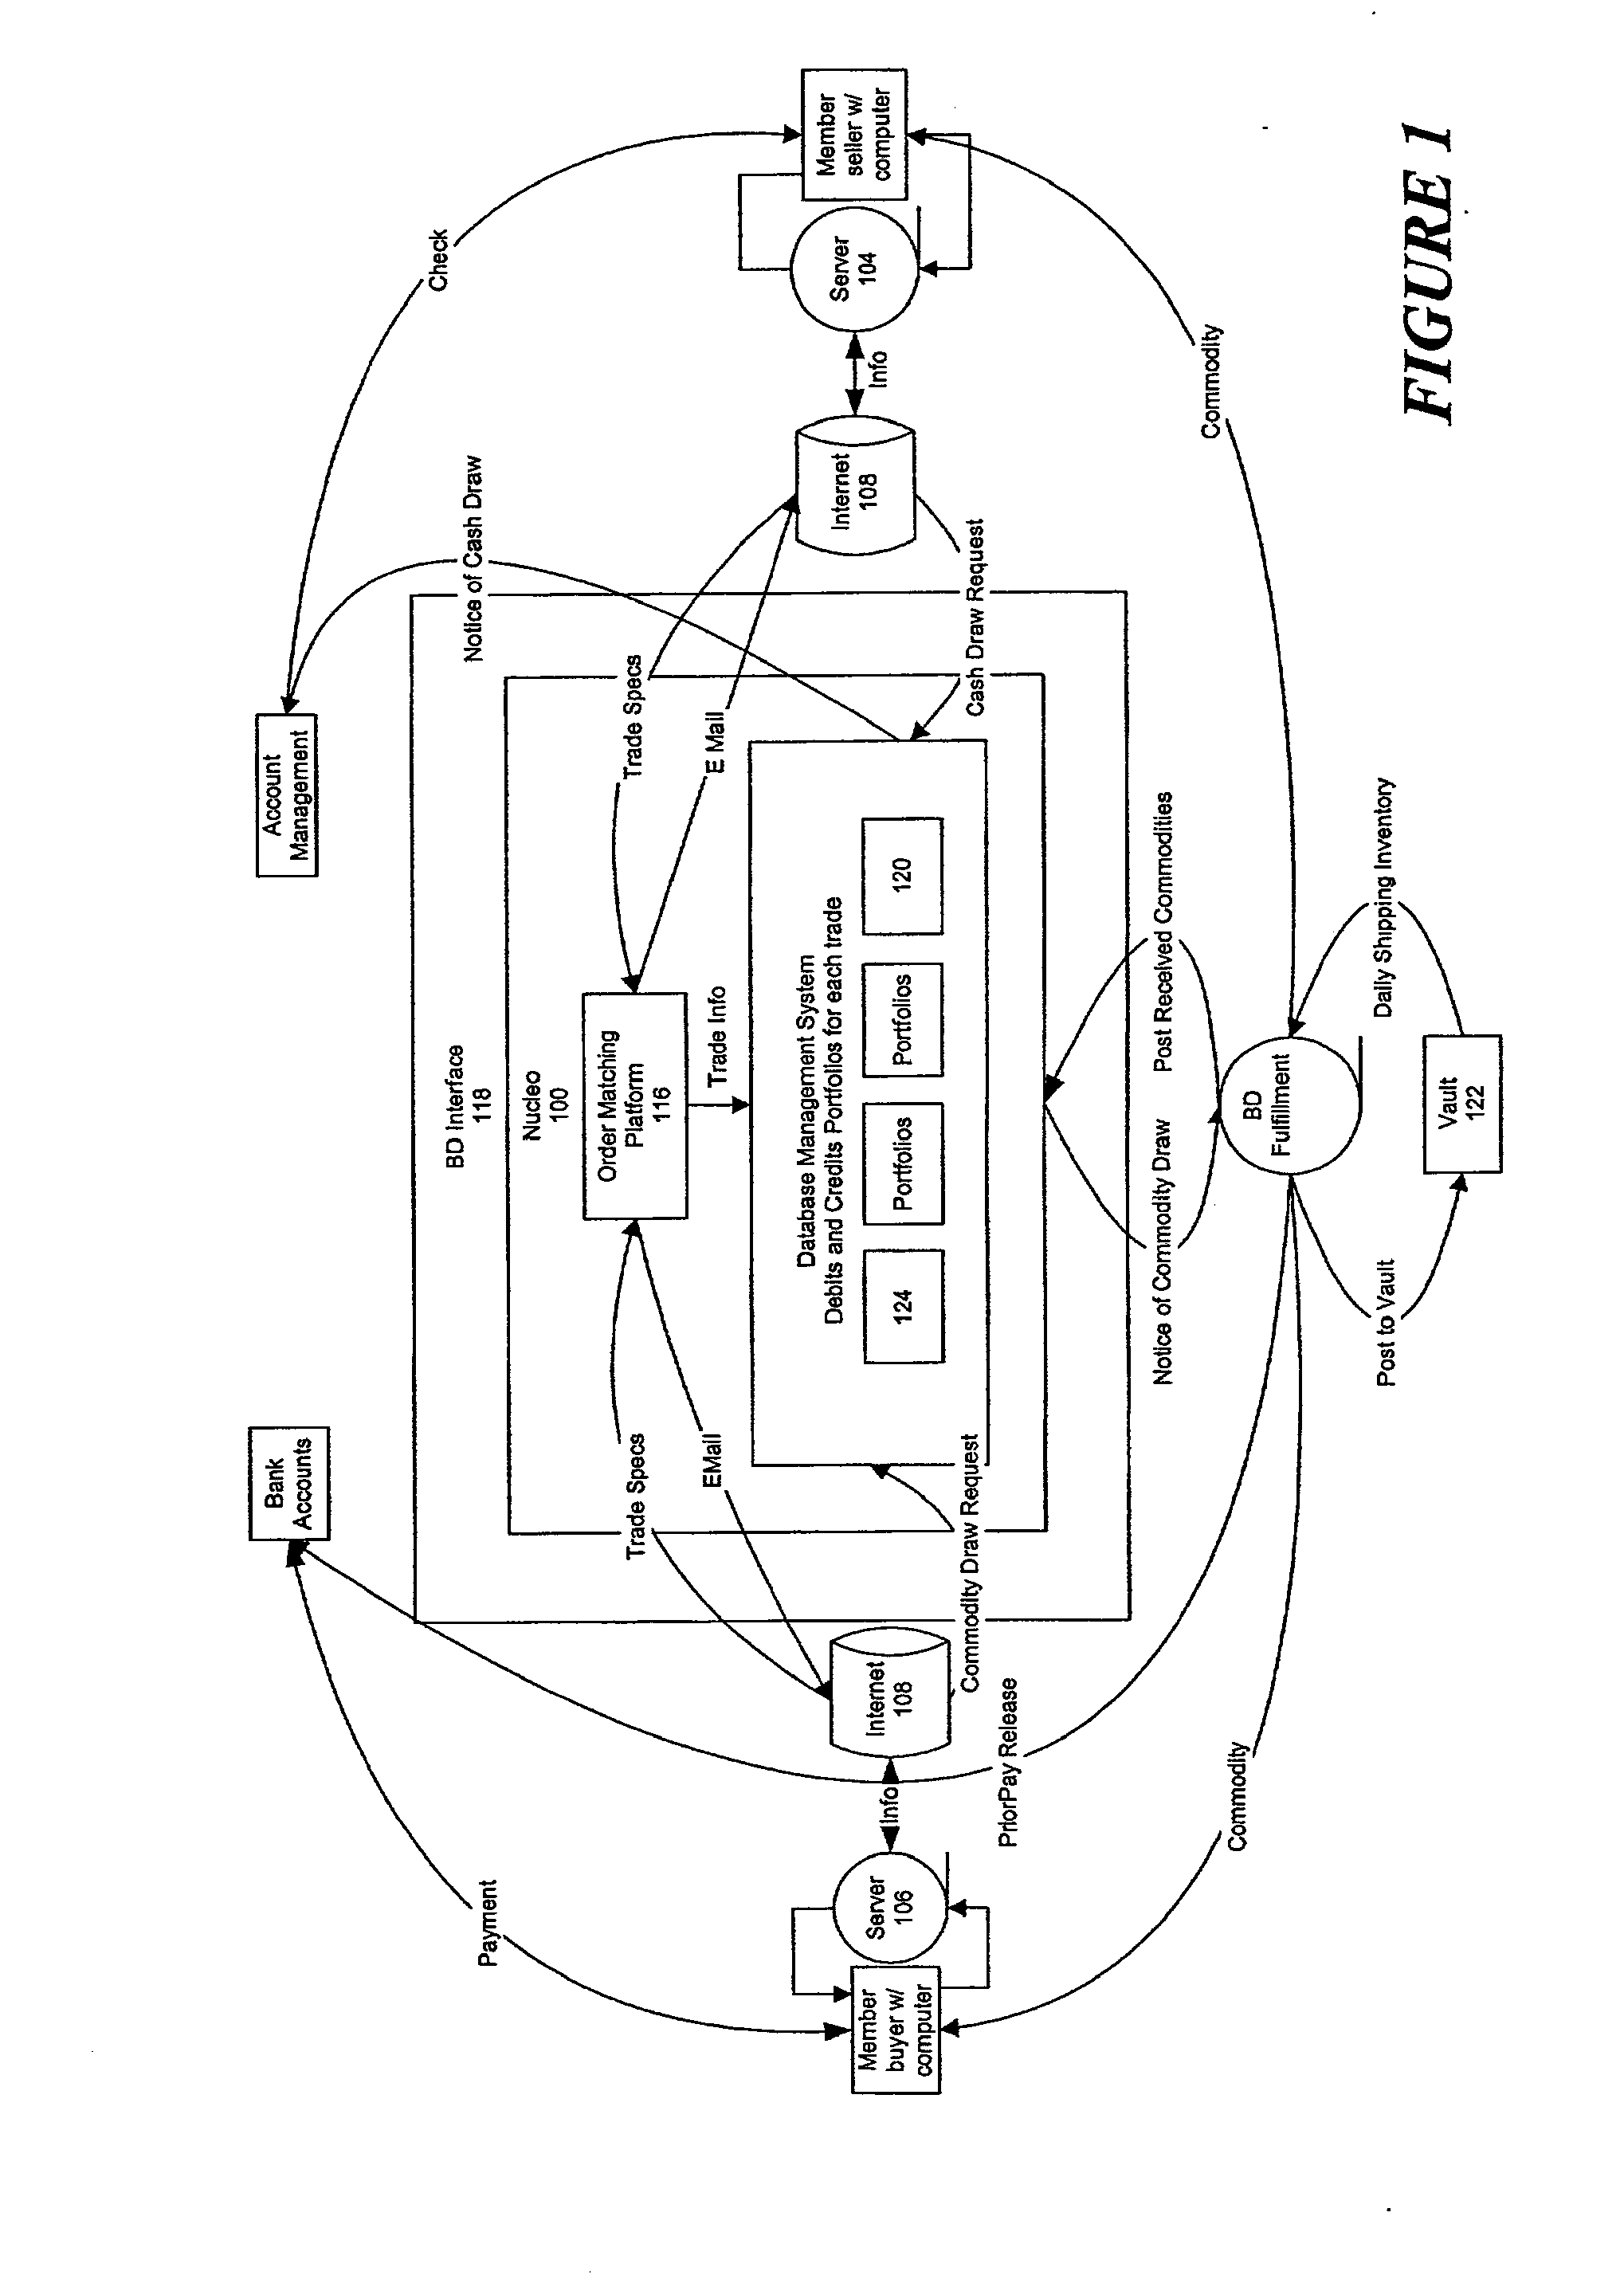 System and method for electronic trading and delivery of a commoditized product